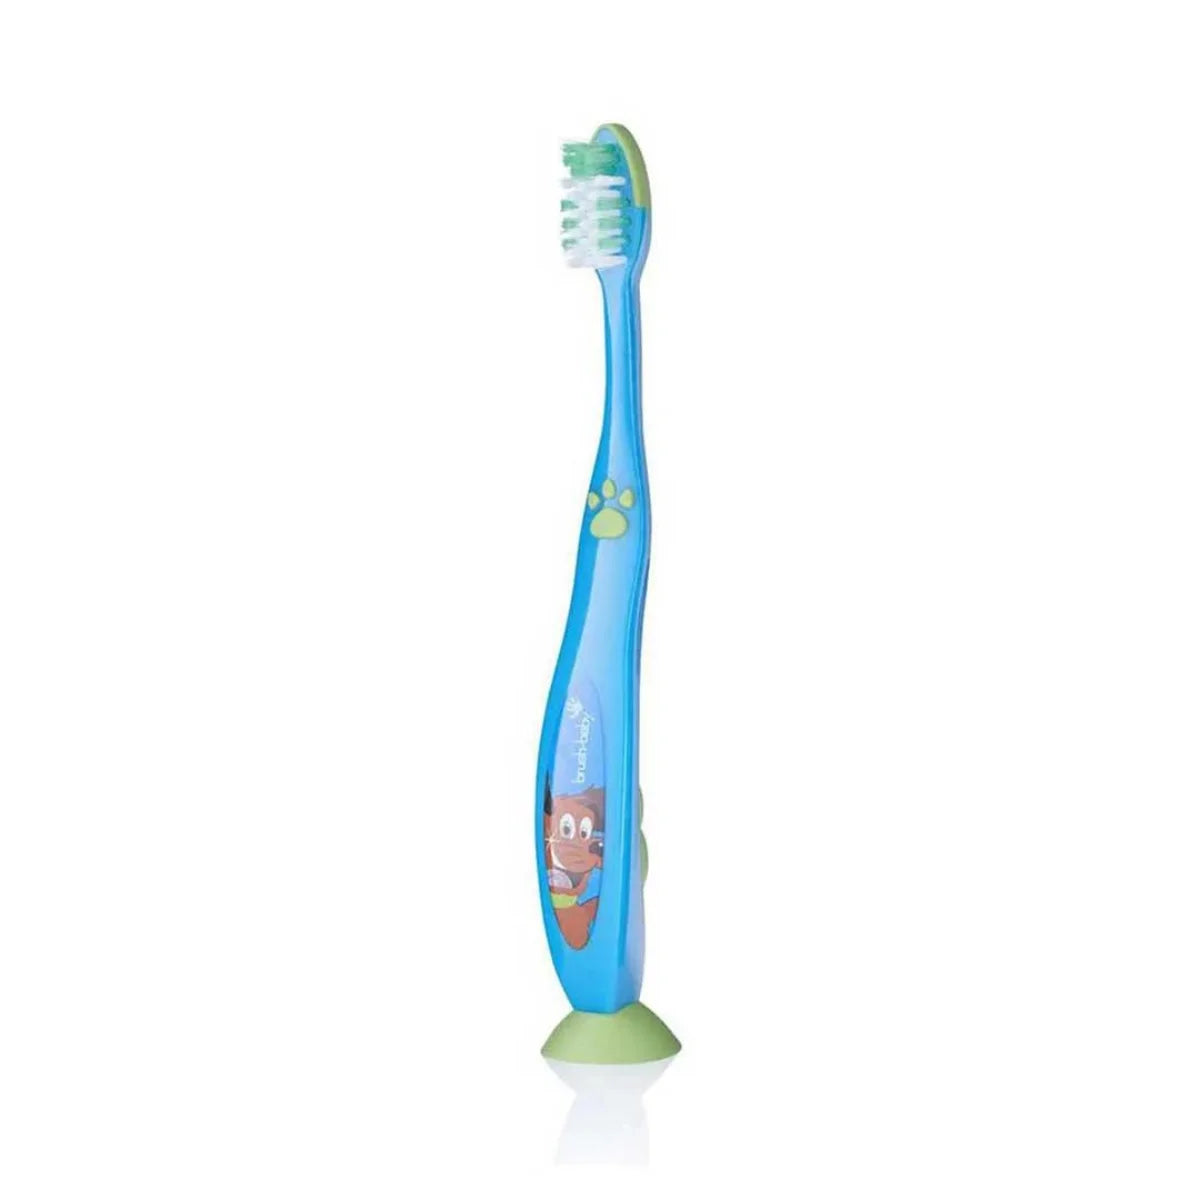 Blue Flossbrush Toothbrush with deep clean bristles toothbrush for kids and round sucker feet